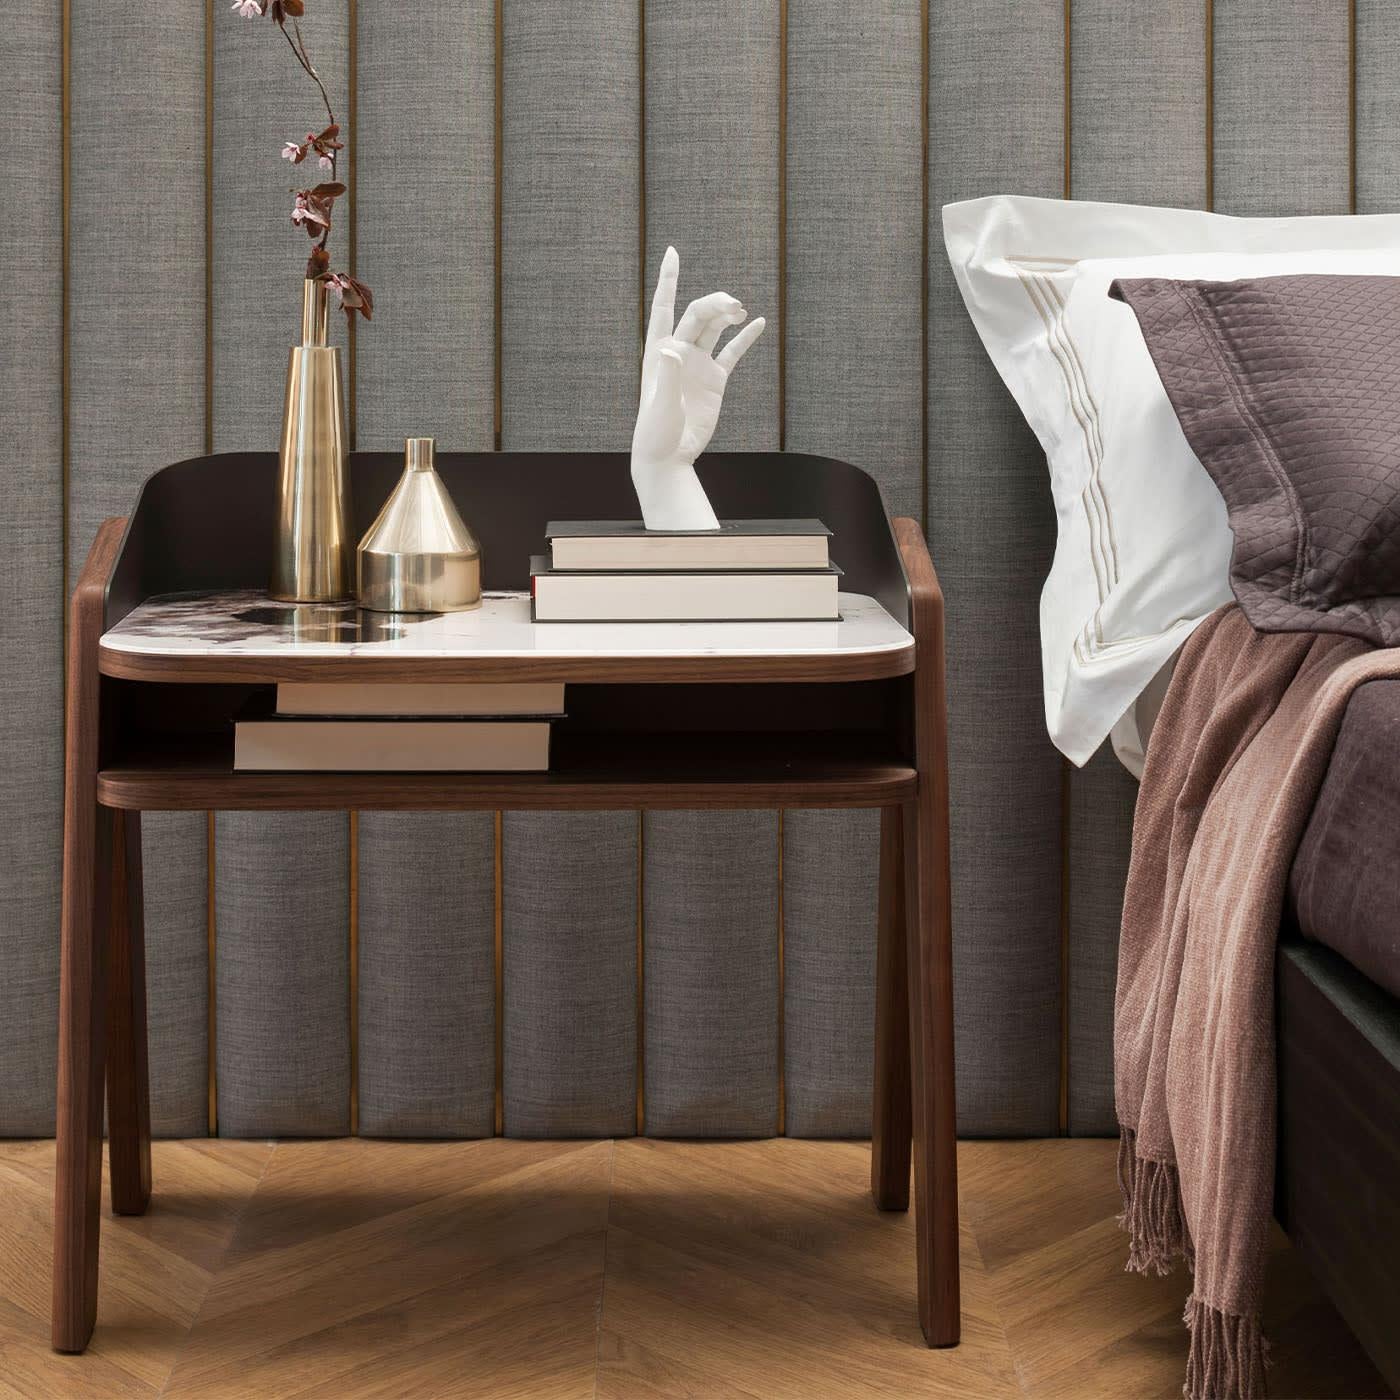 Dynamic lines trace the profiles of this exclusive nightstand, immediately capturing the eye with the fine print of Trinity White marble that adorns its glass top's back. Marked by a daring upside-down V shape, the solid walnut legs encounter an